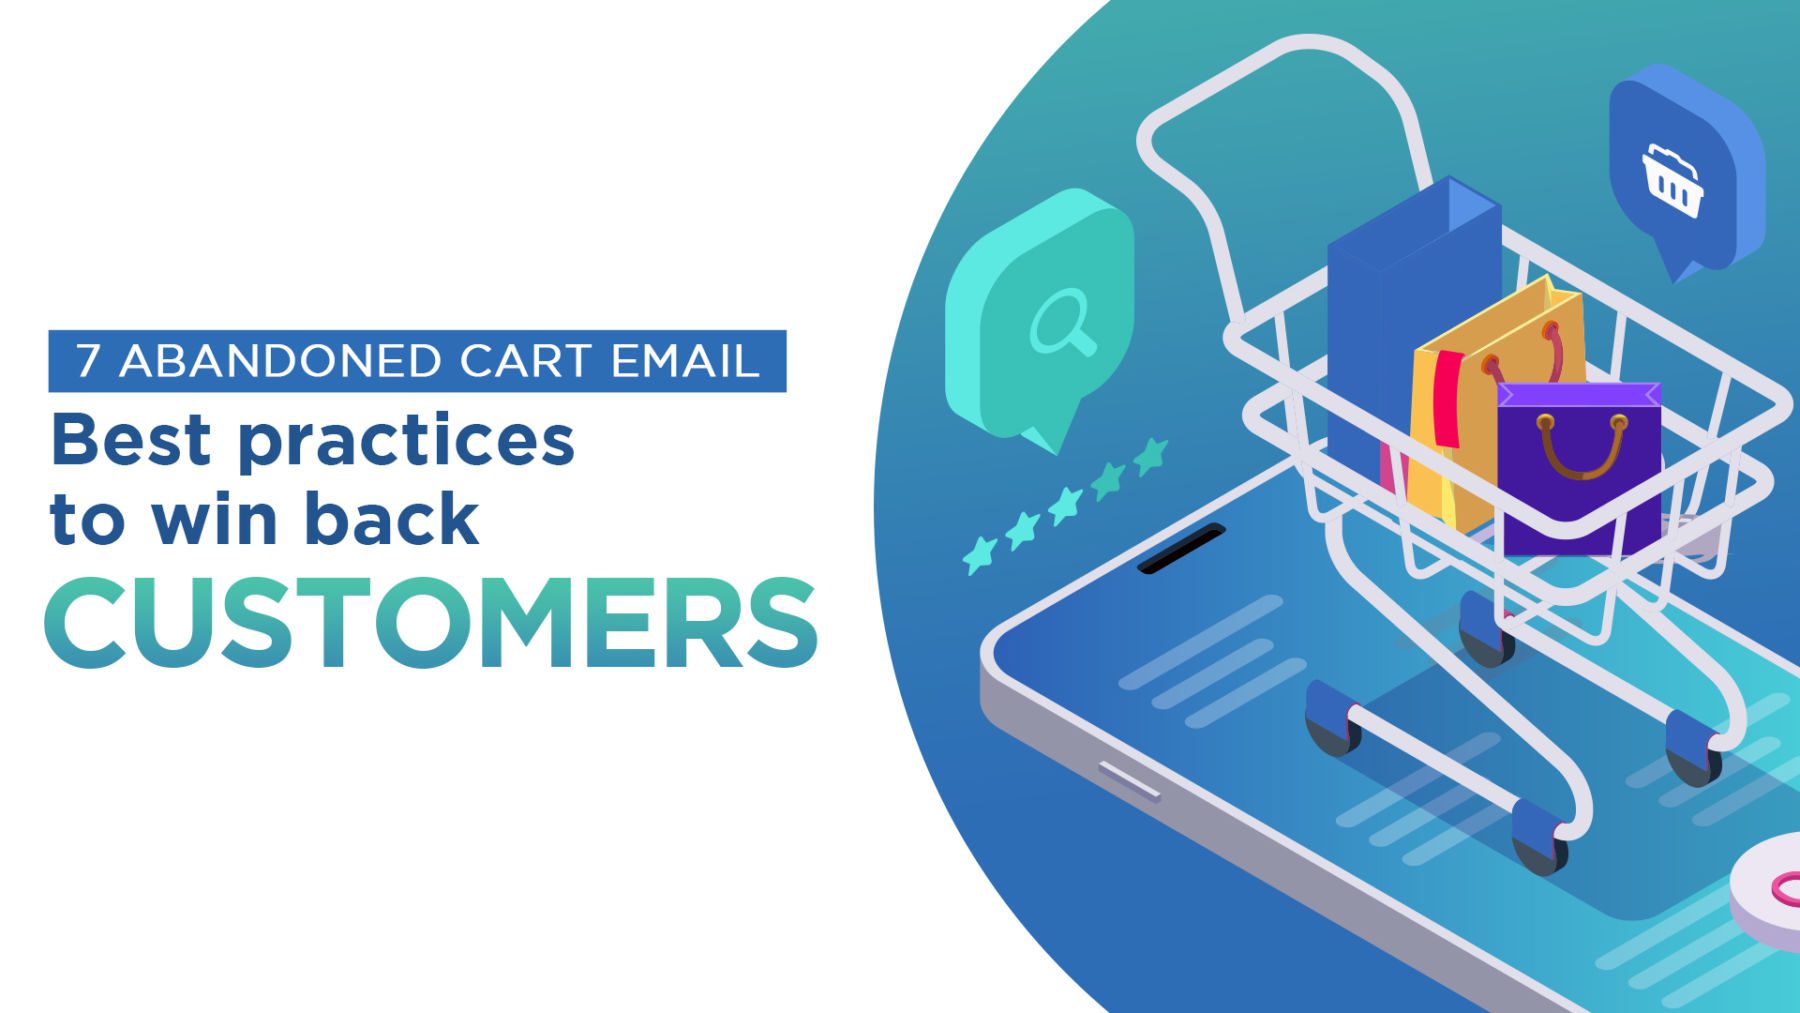 7 Abandoned Cart Email Best Practices to Win Back Customers